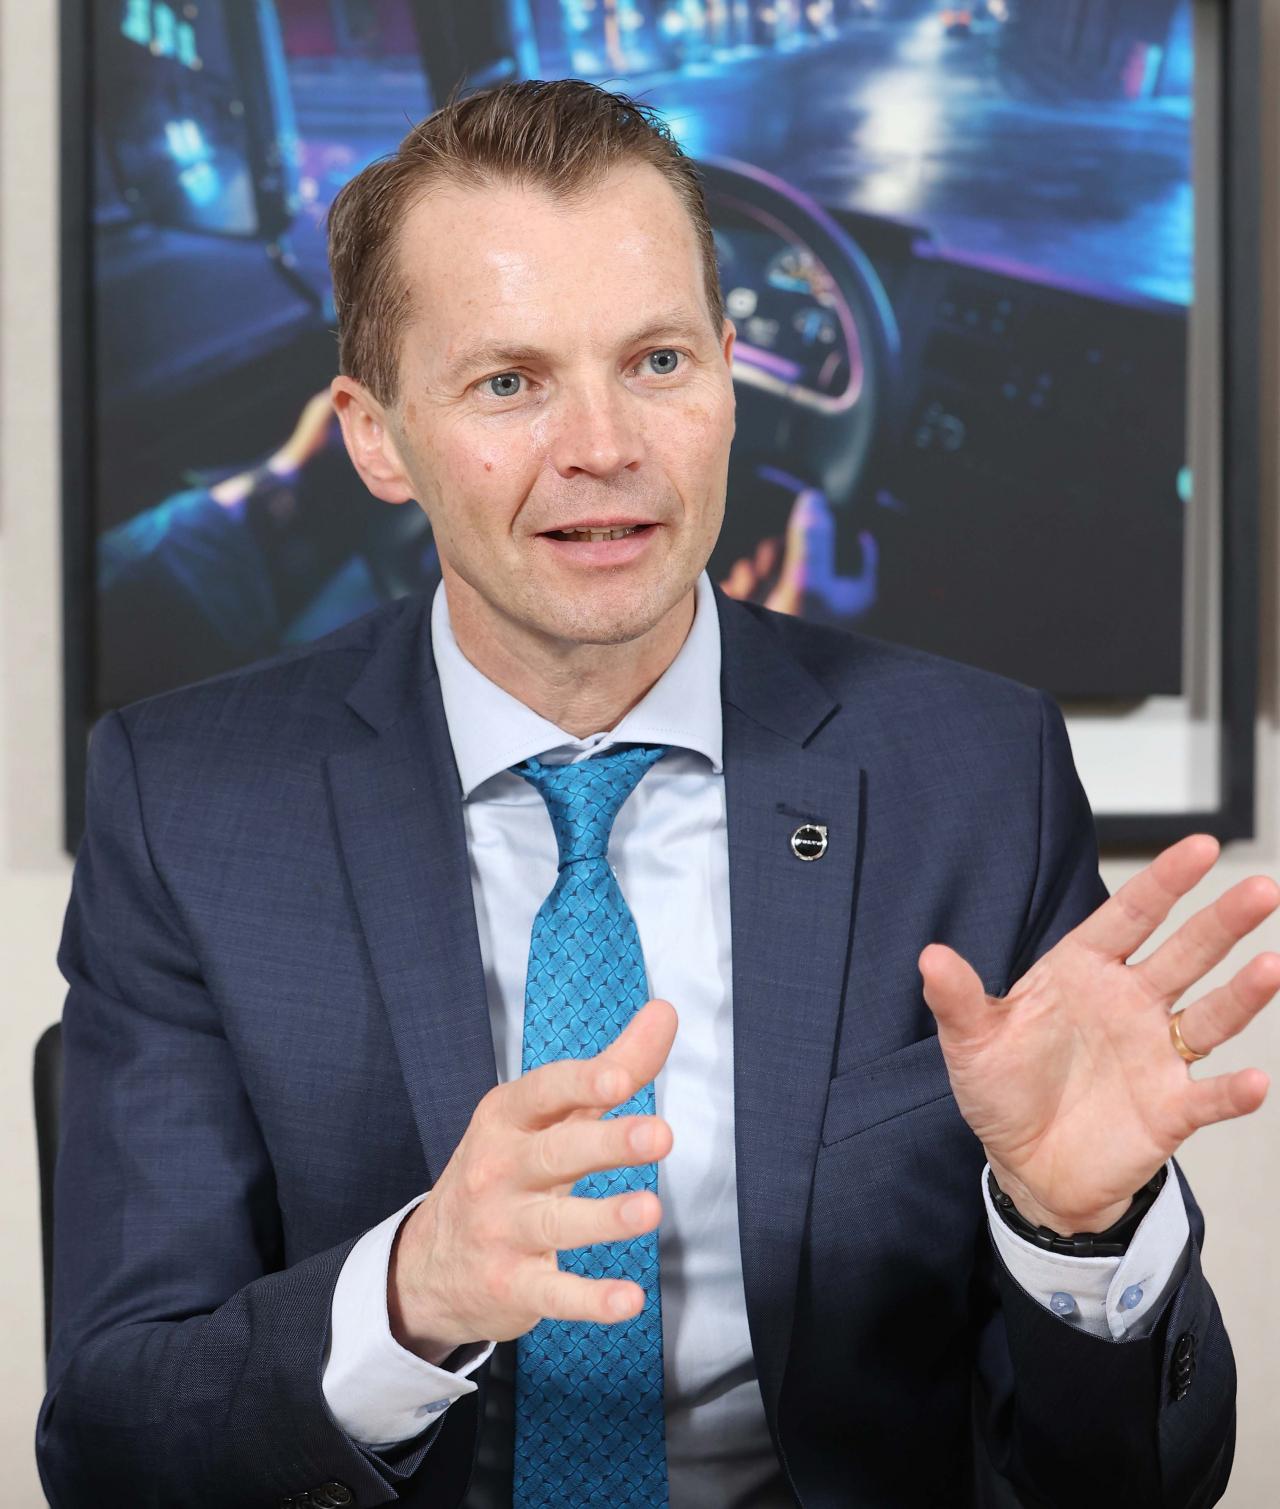 Johan Selven, vice president of sales and marketing at Volvo Trucks International, speaks to The Korea Herald in an interview in Seoul on Wednesday. (Volvo Trucks Korea)